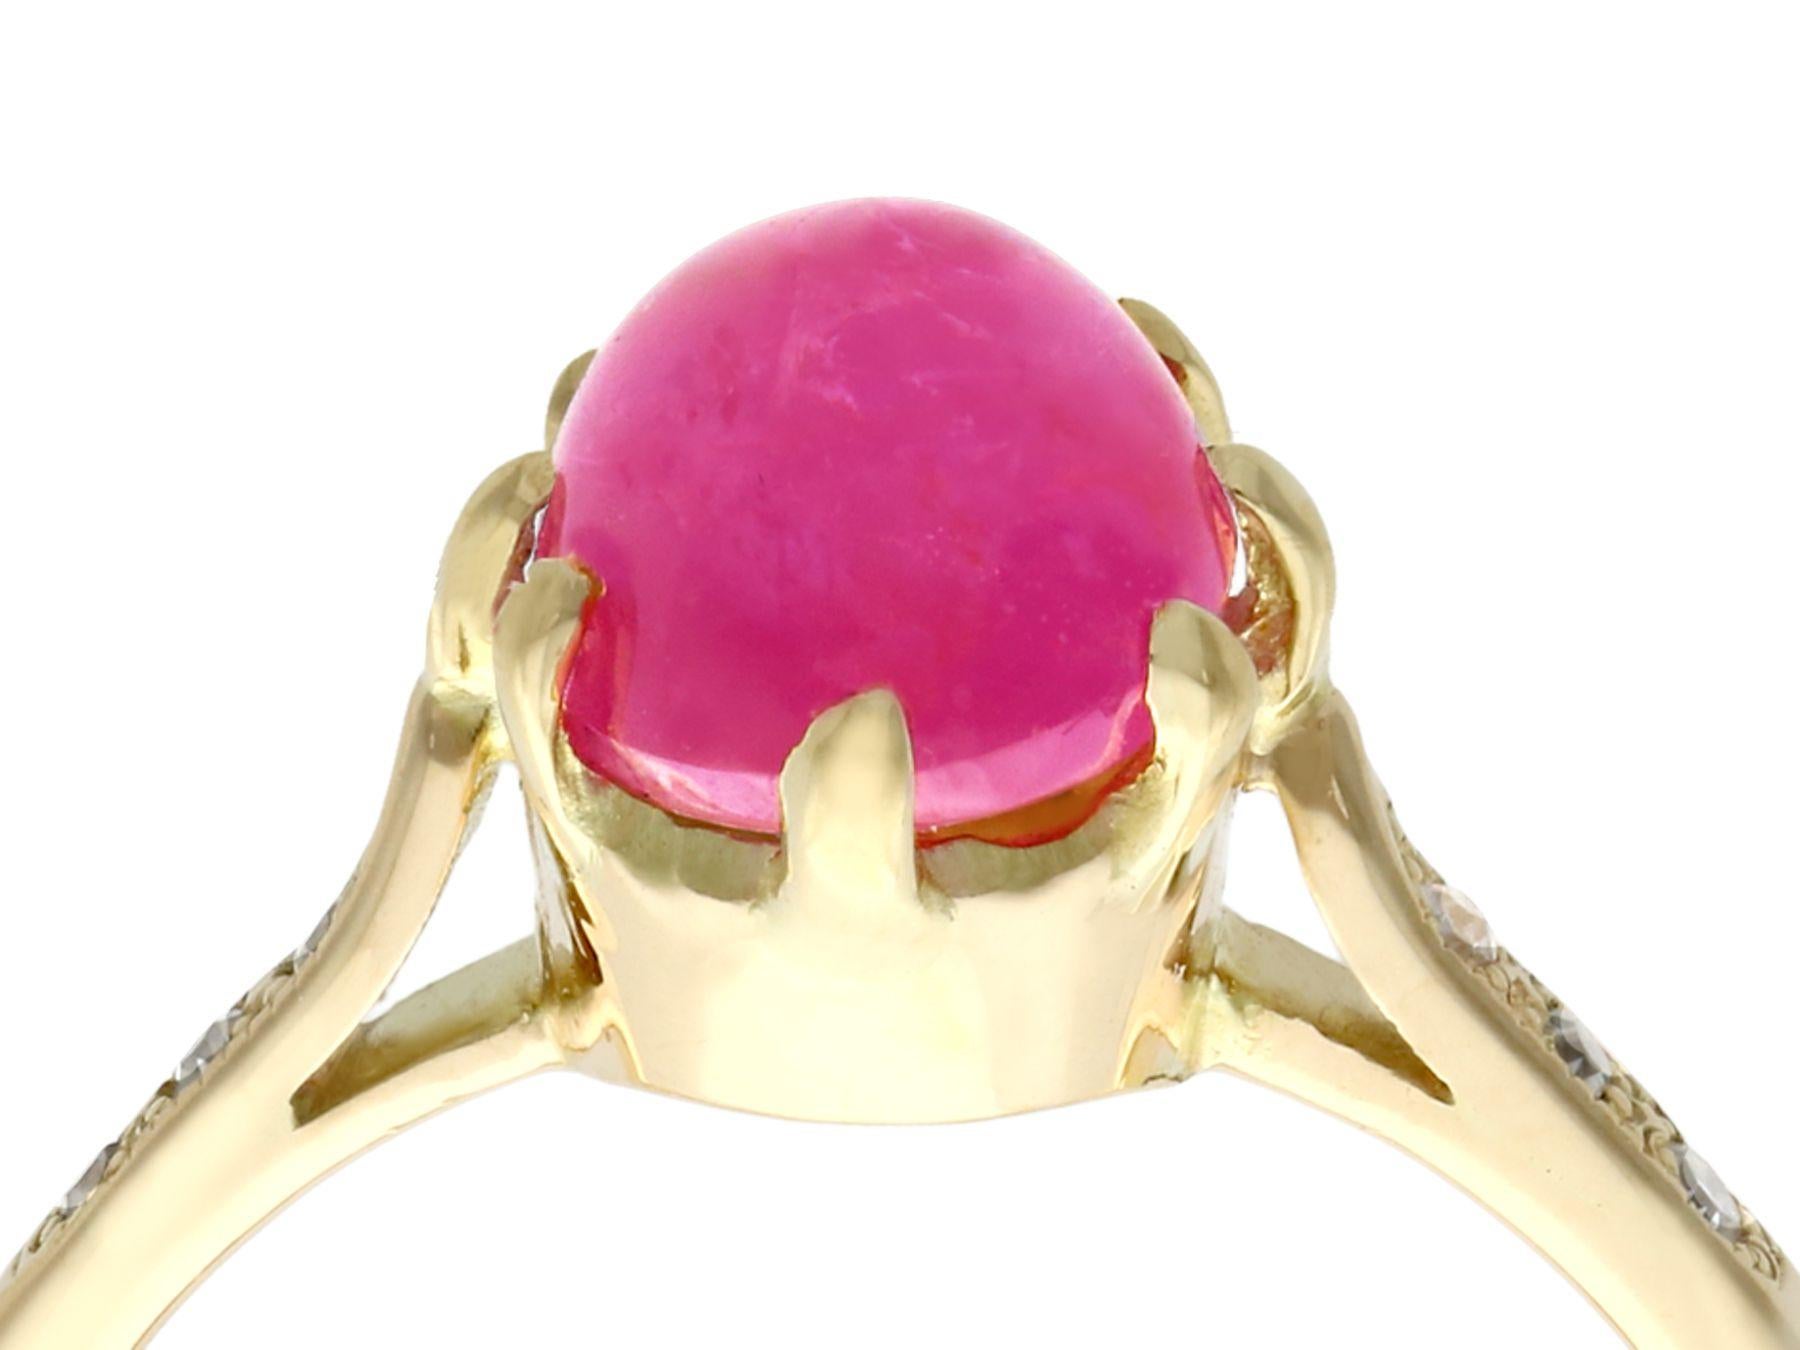 An impressive 2.68 carat pink star ruby and 0.08 carat diamond, 15 karat yellow gold solitaire style cocktail ring; part of our diverse gemstone jewelry collections.

This fine and impressive cabochon cut ruby ring has been crafted in 15k yellow